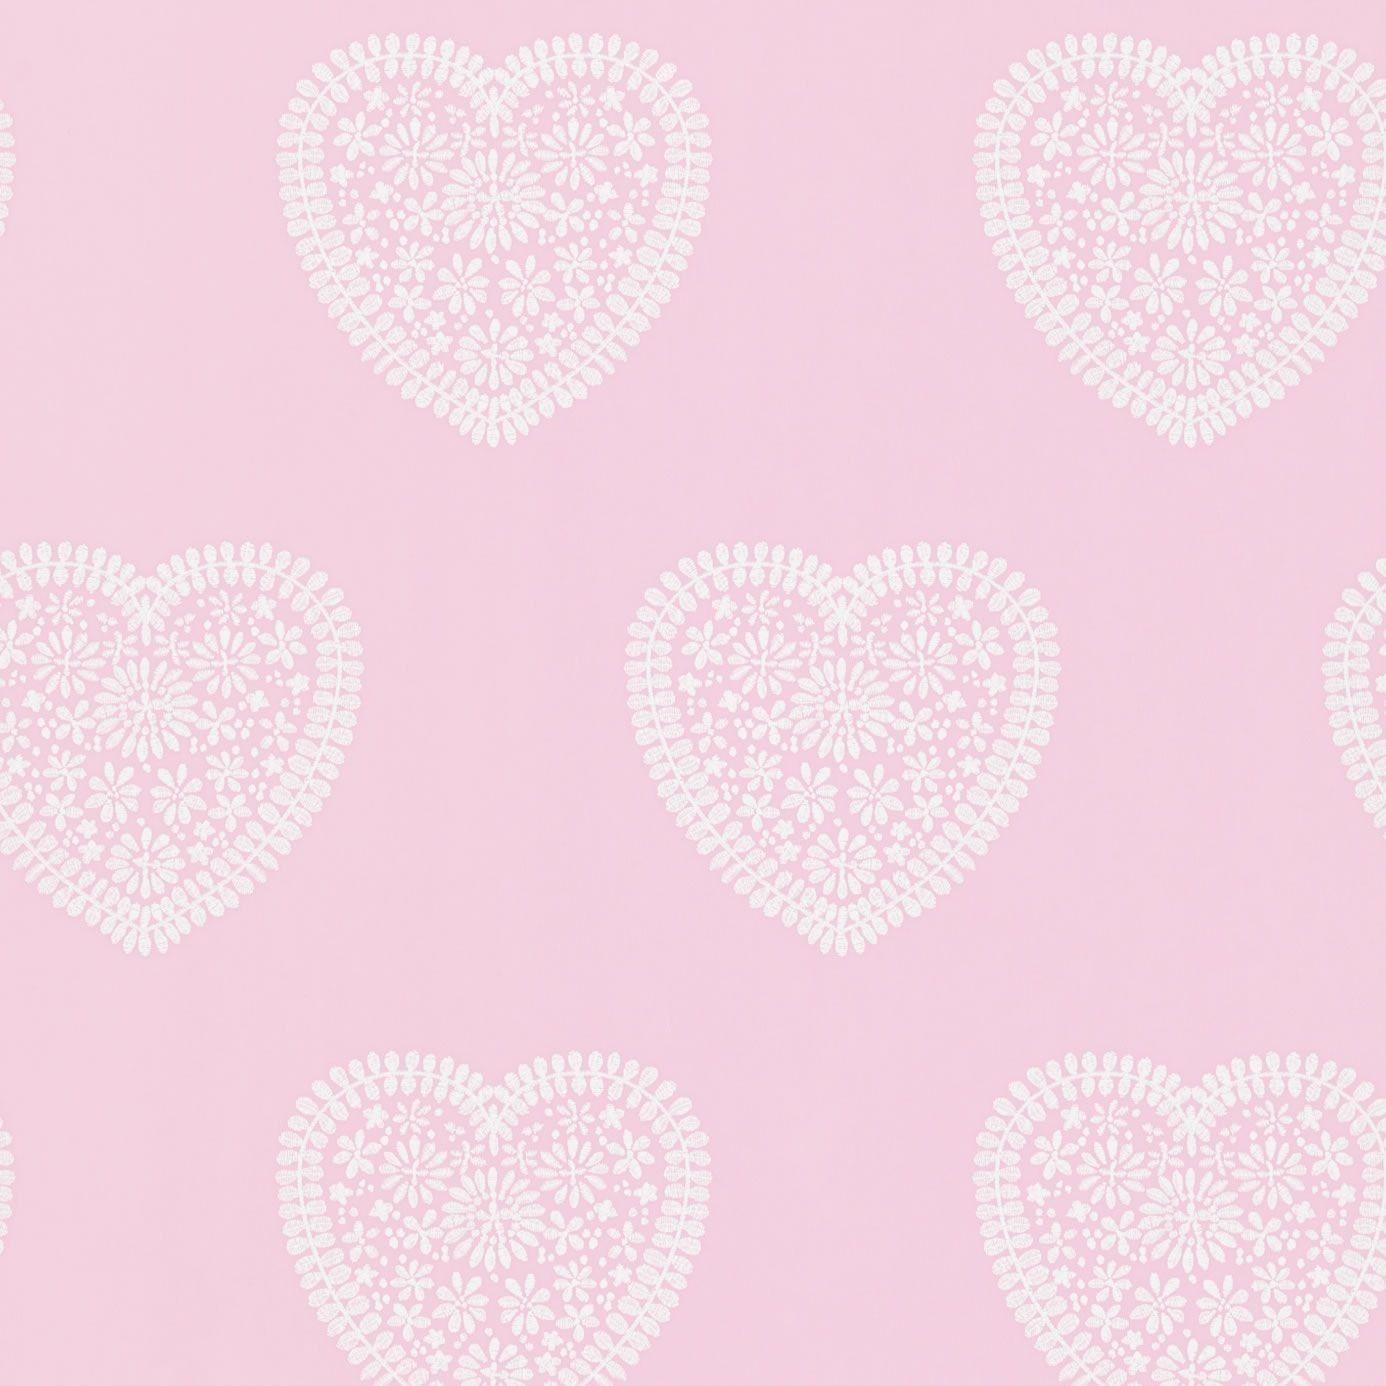 Decor Supplies. Soft Pink Hearts About Me